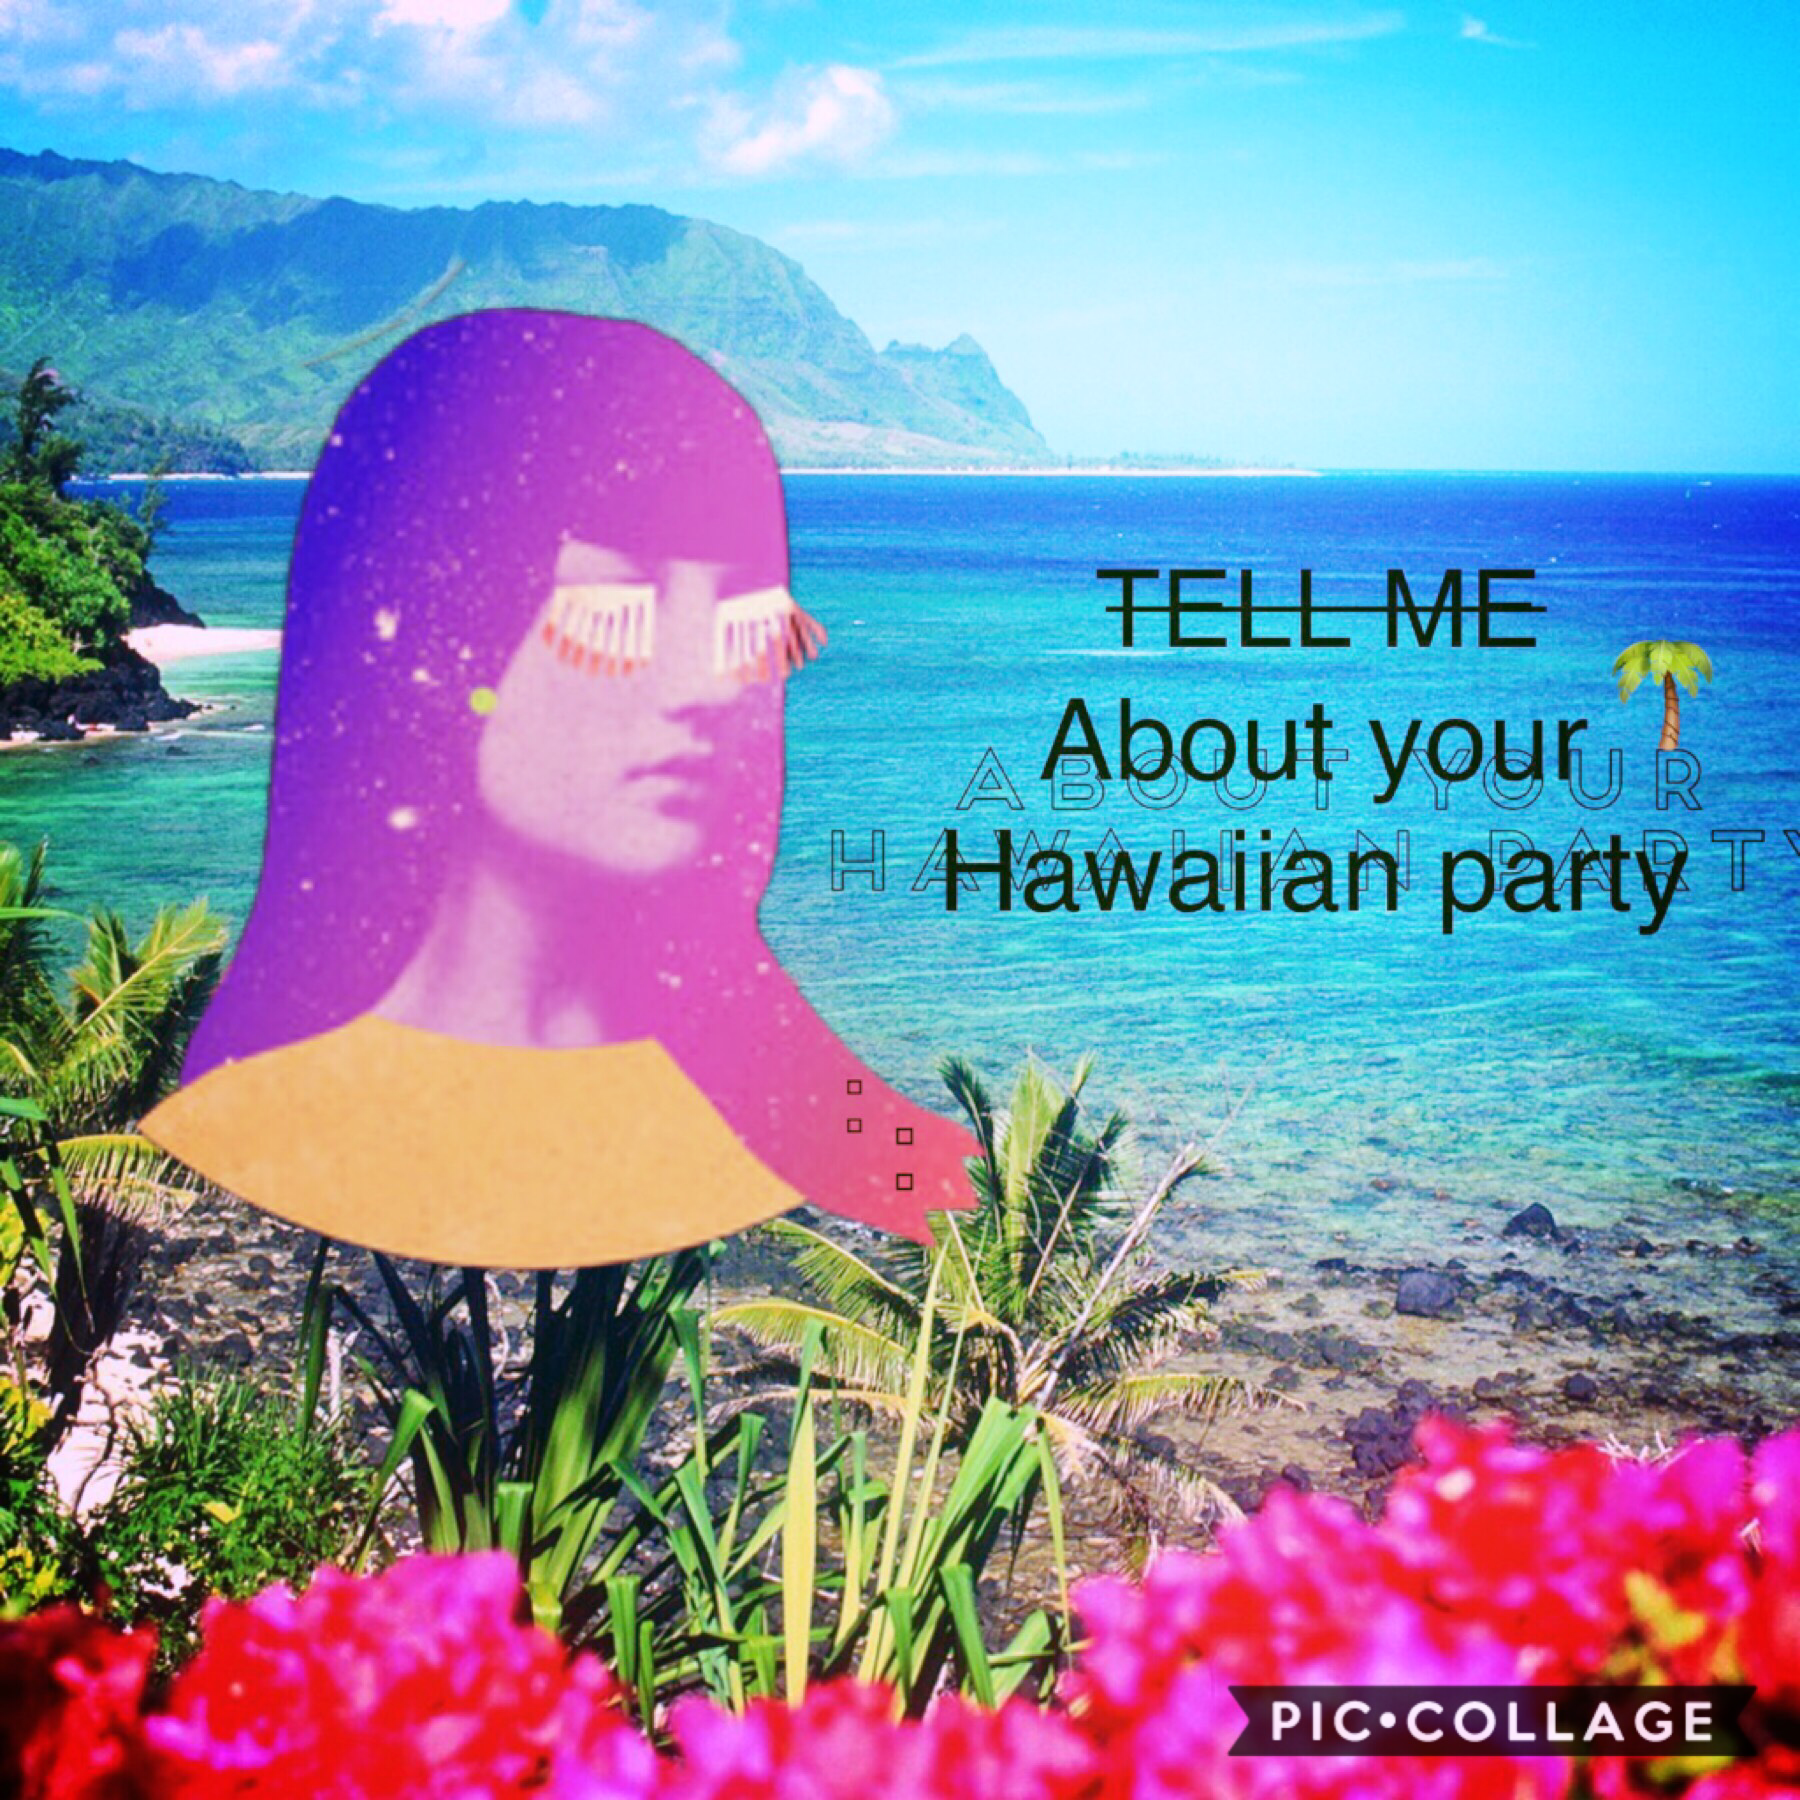 Just discovered this amazing new song called Hawaiian Party my cub sport. Check it out